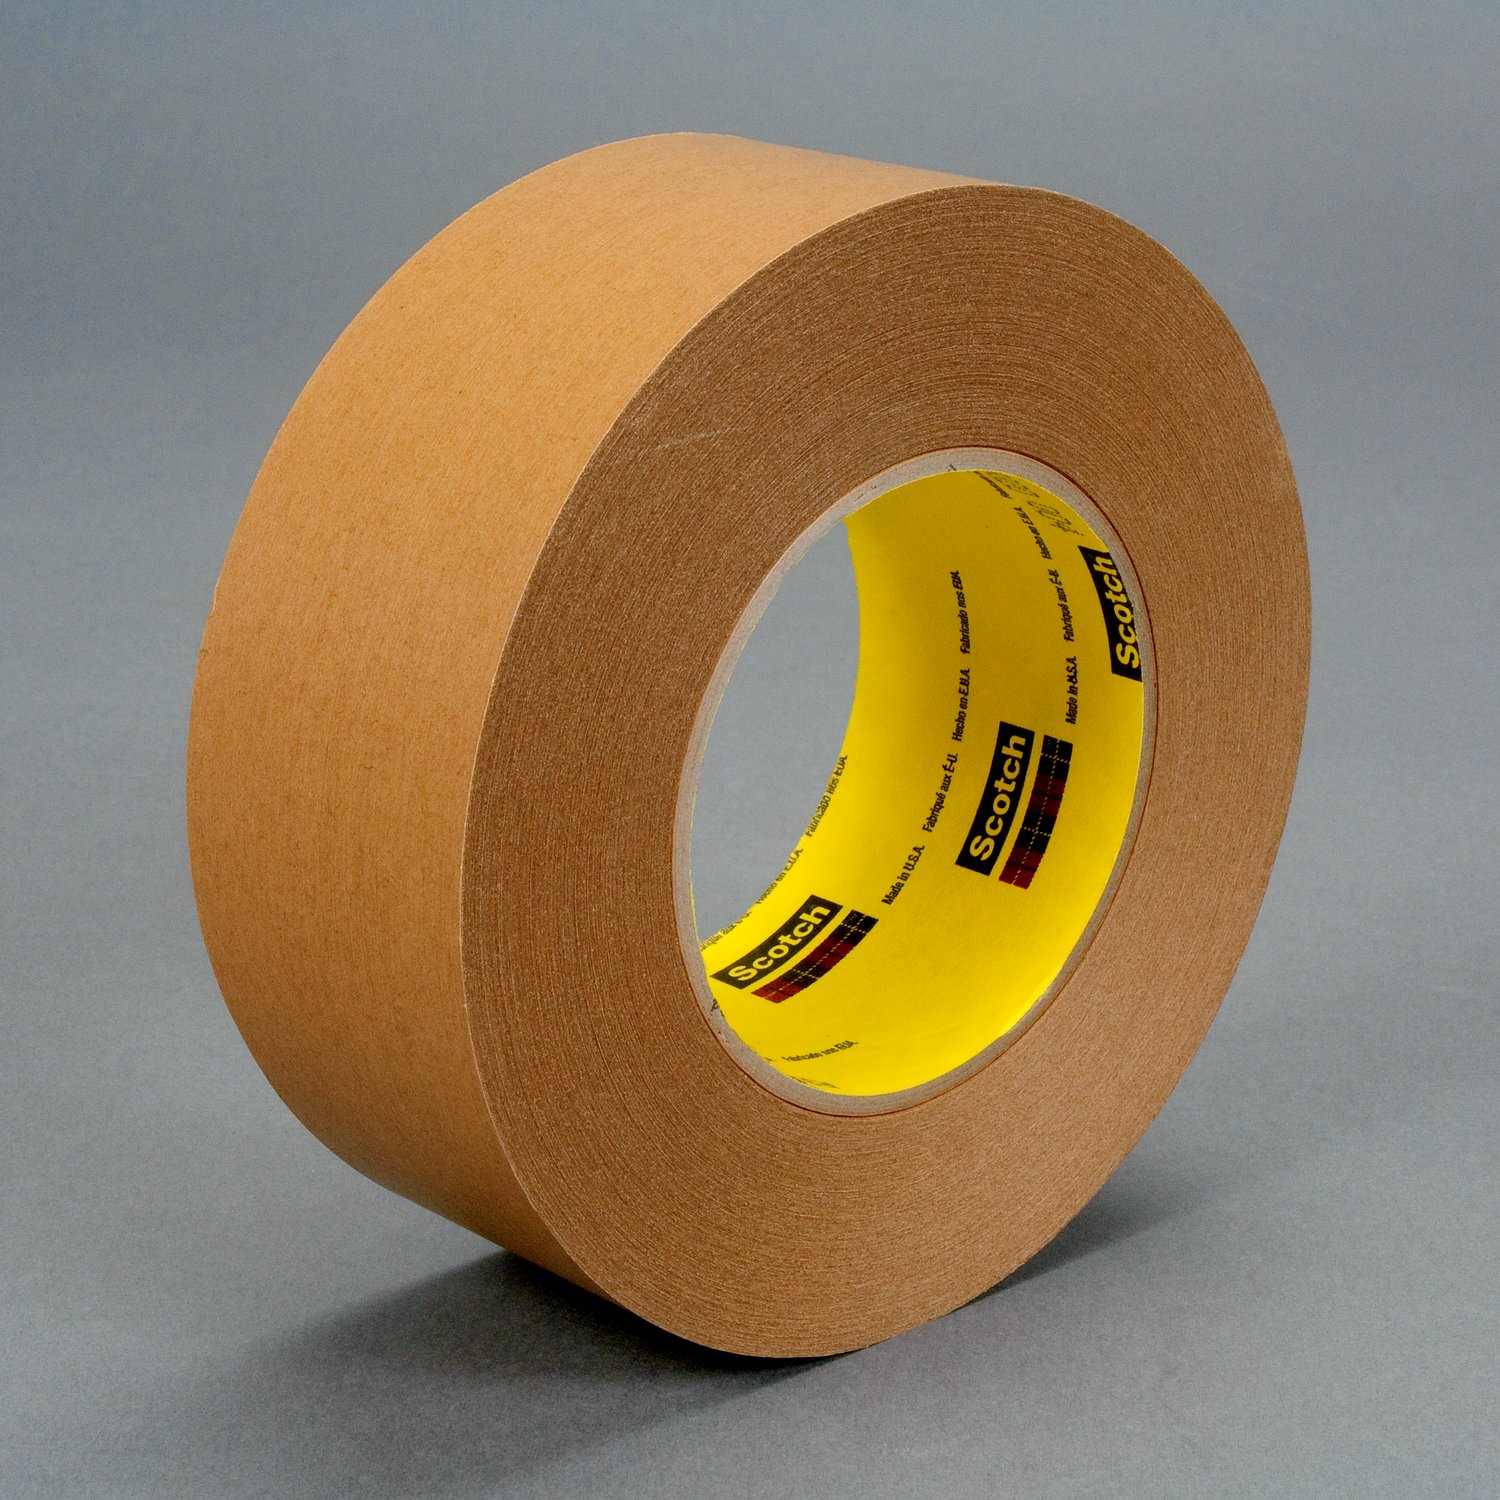 7100028043 - 3M Repulpable Strong Single Coated Tape R3187, Kraft, 96 mm x 110 m,
7.5 mil, 2 rolls per case